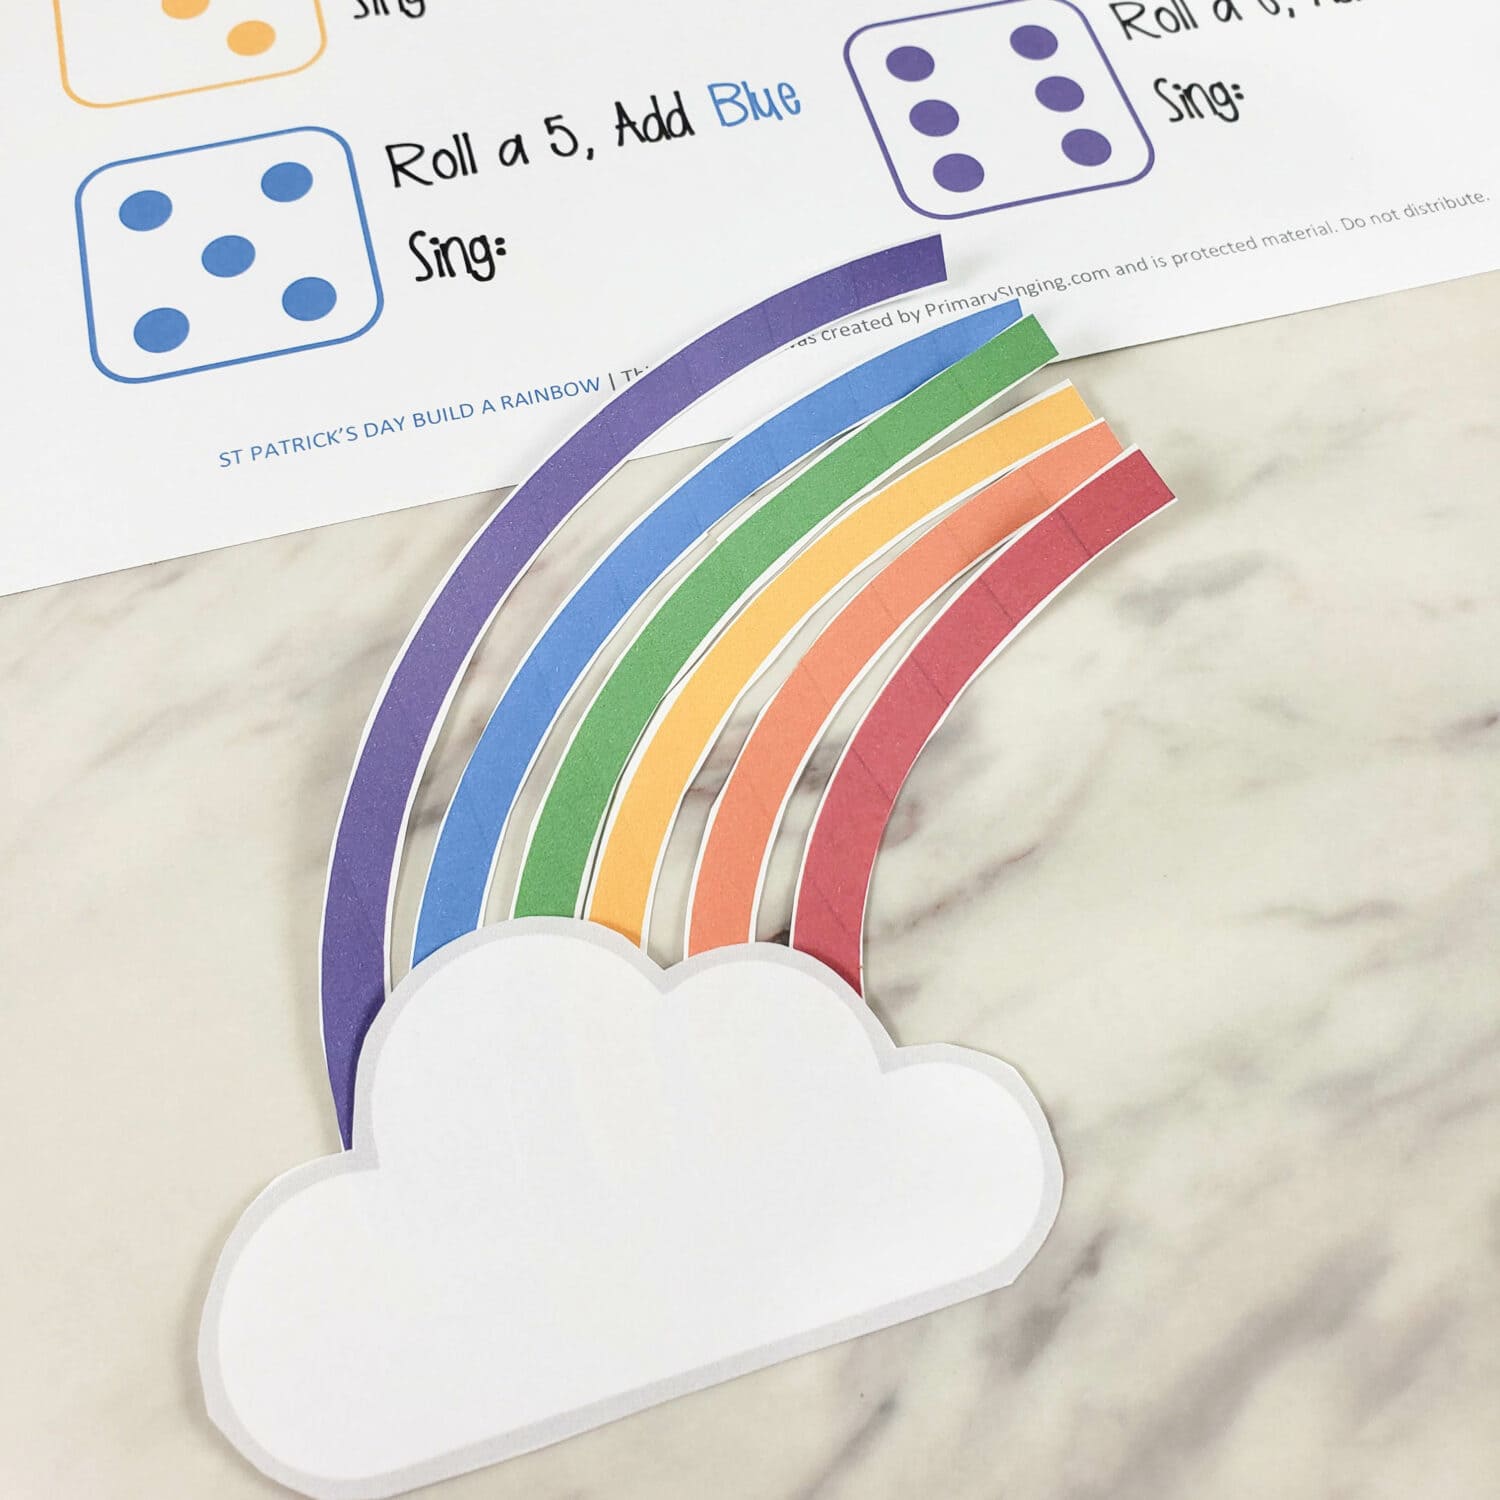 Roll a Rainbow Printable dice game fun for teachers, church, or home use with free printable and fun extension ways to play. Perfect St Patrick's Day activities for kids.